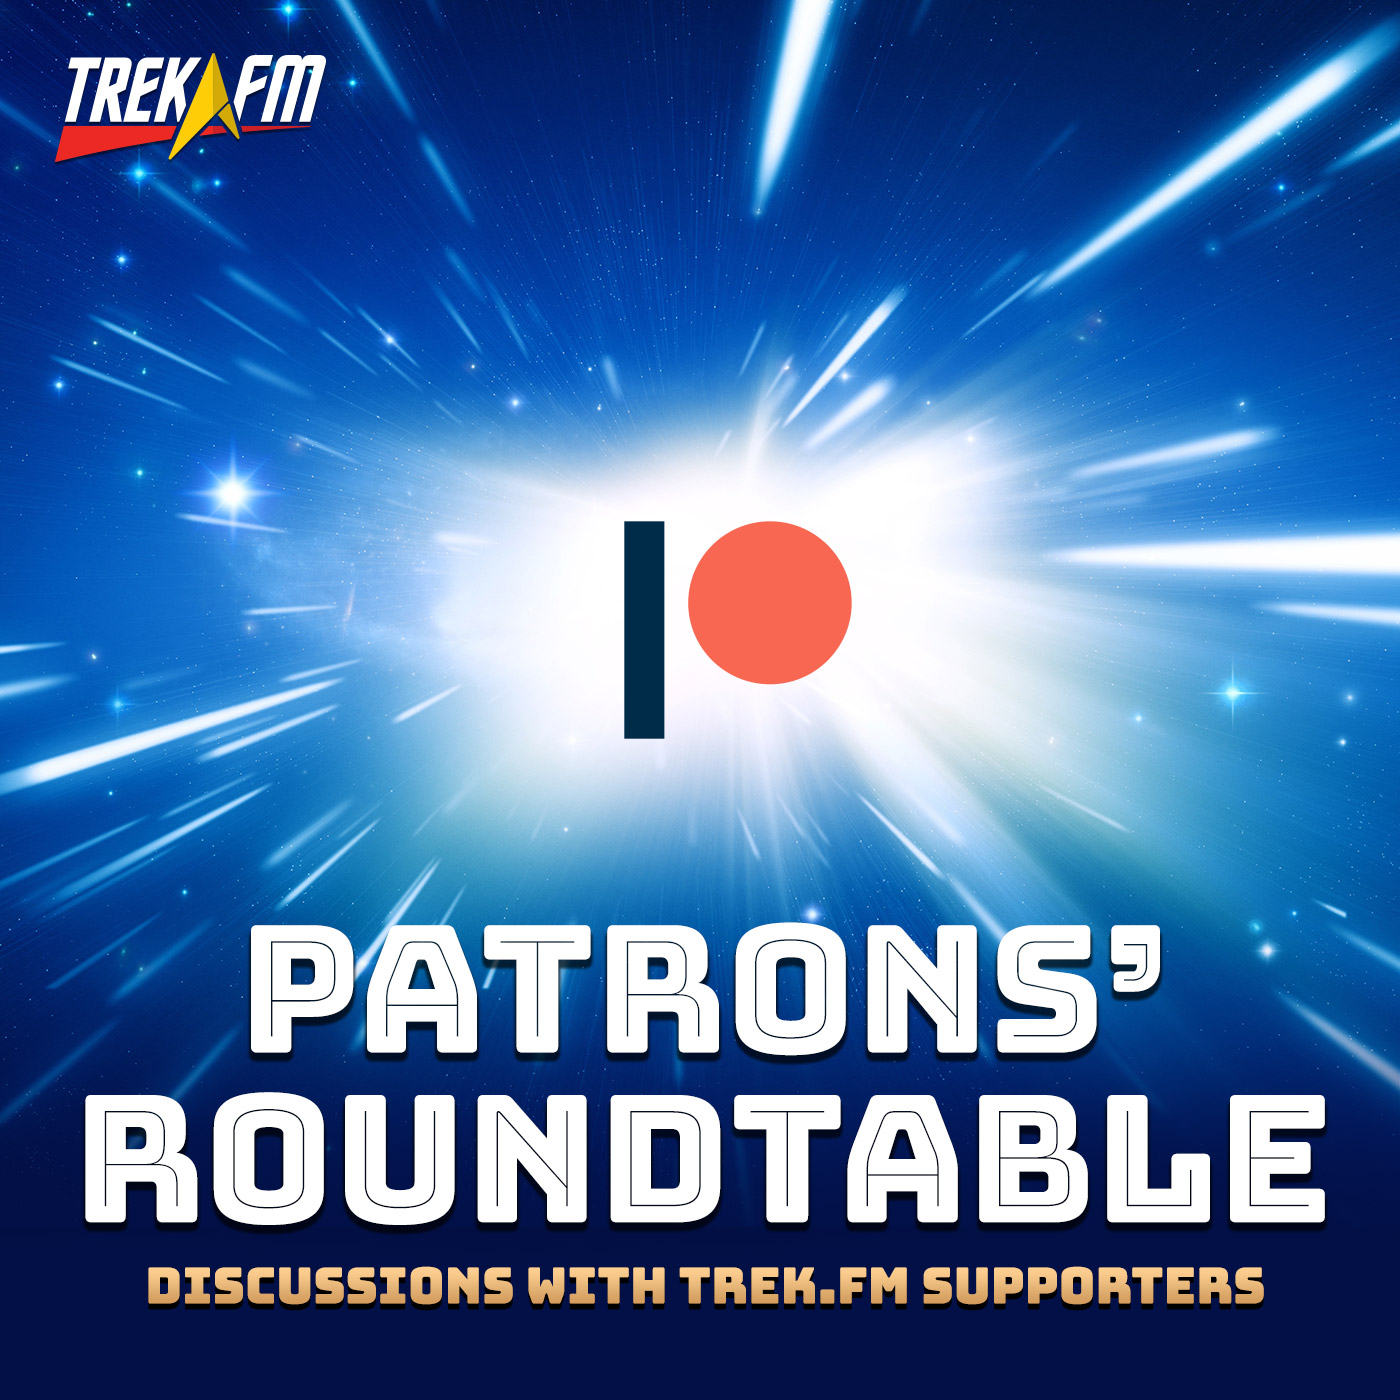 Patrons-Roundtable-Cover-2018-1400x1400-ITN.jpg